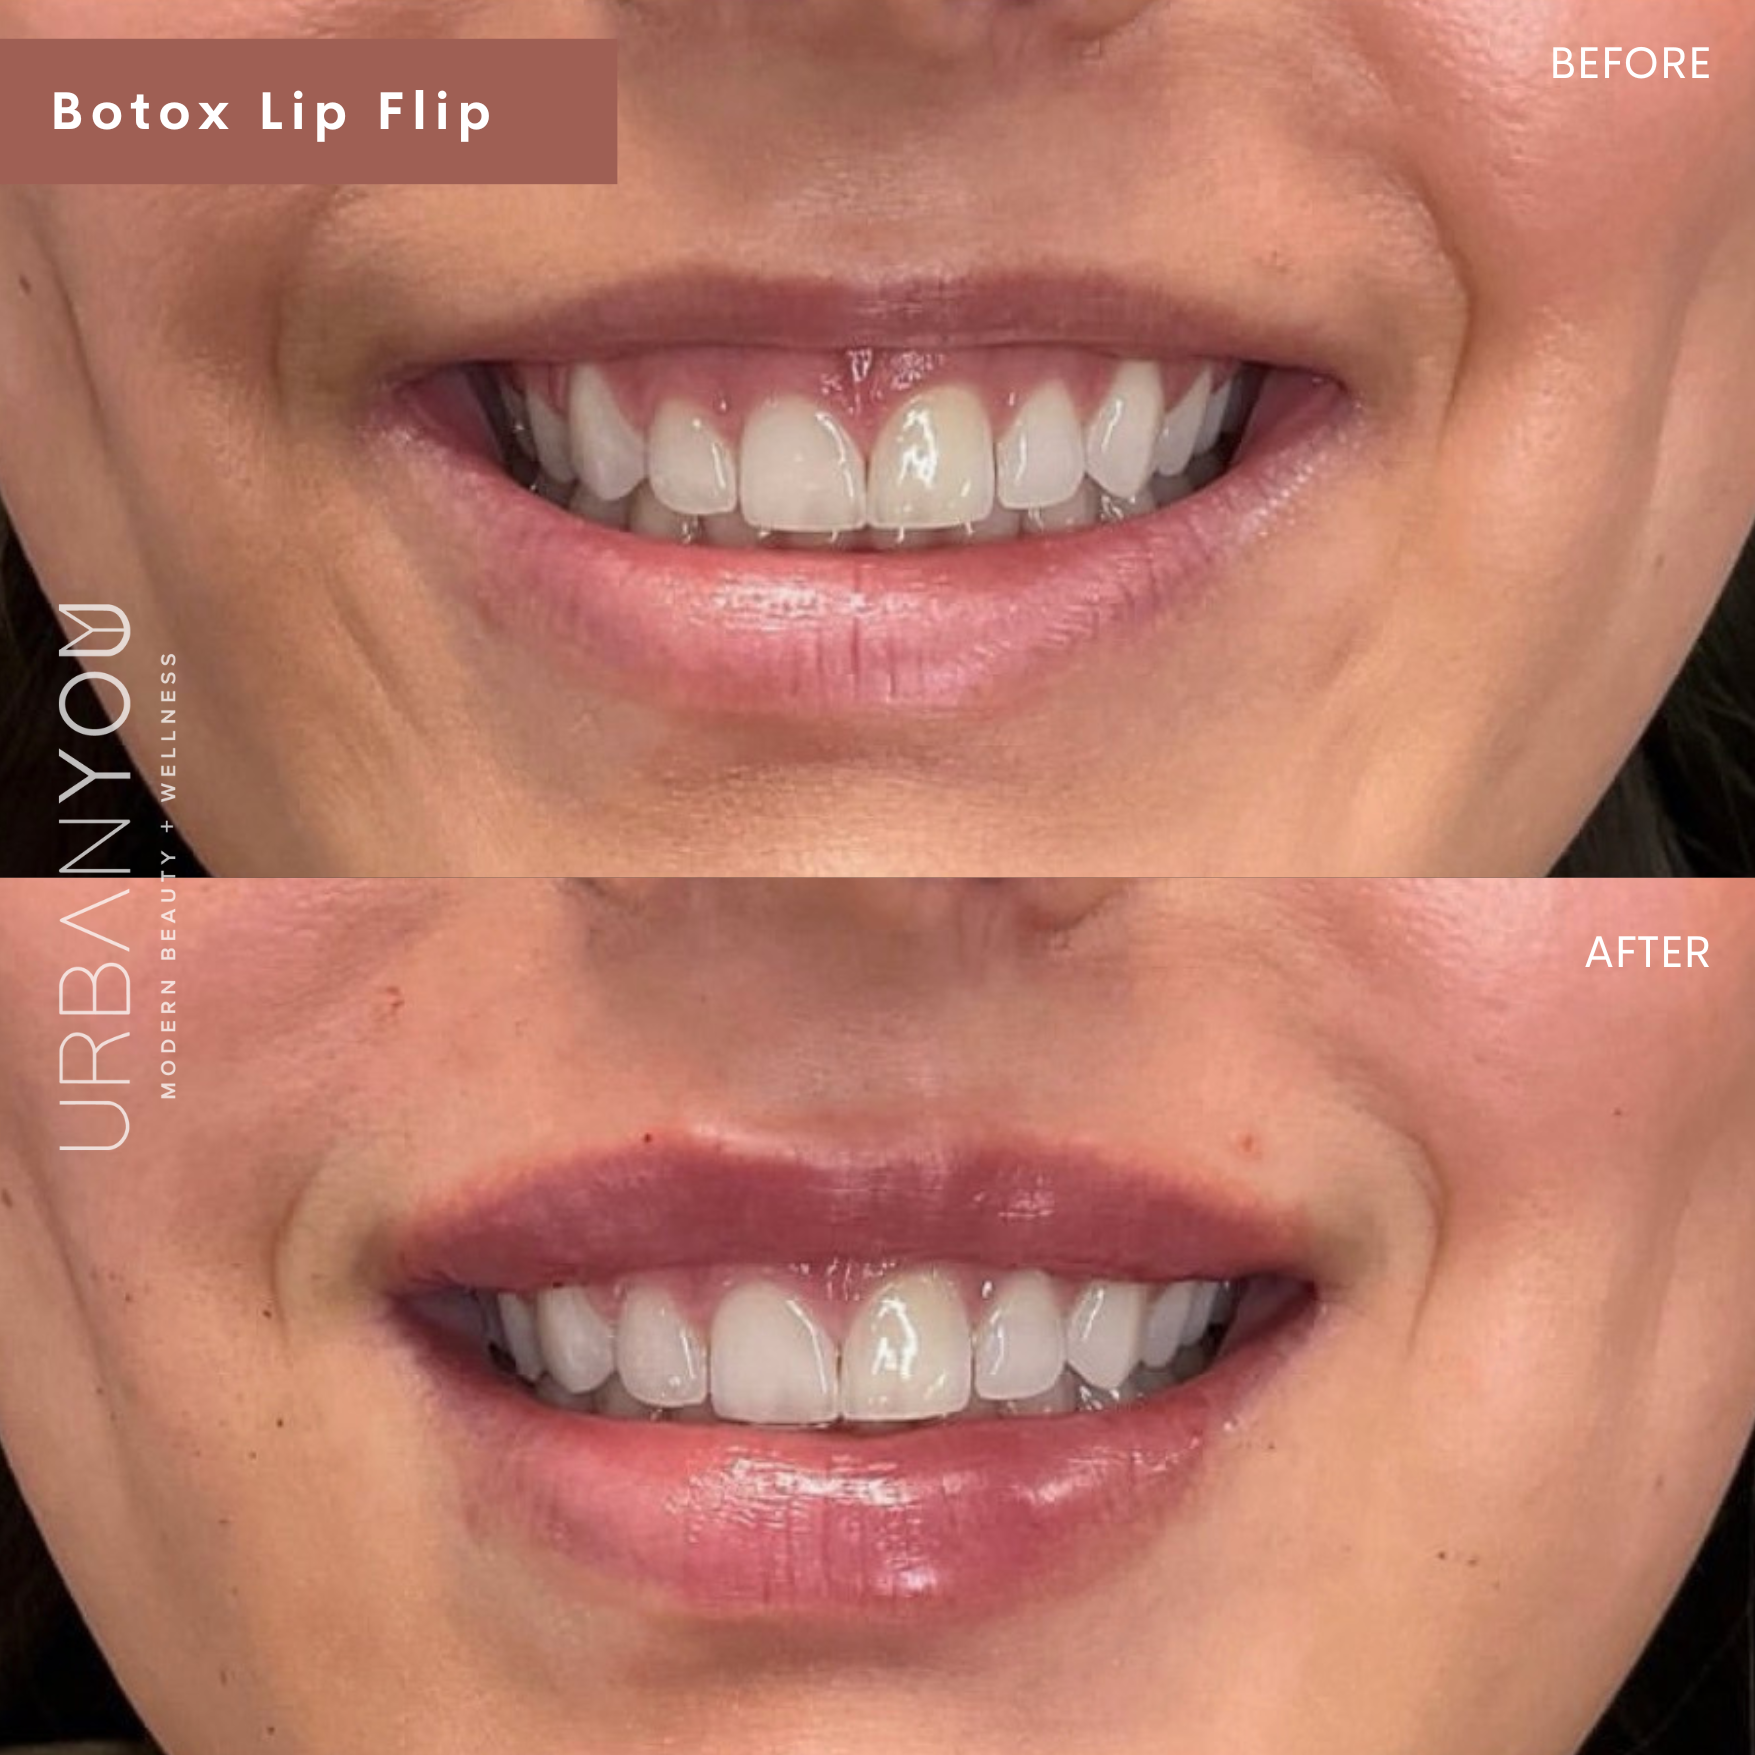 Botox Lip Flip Before and After